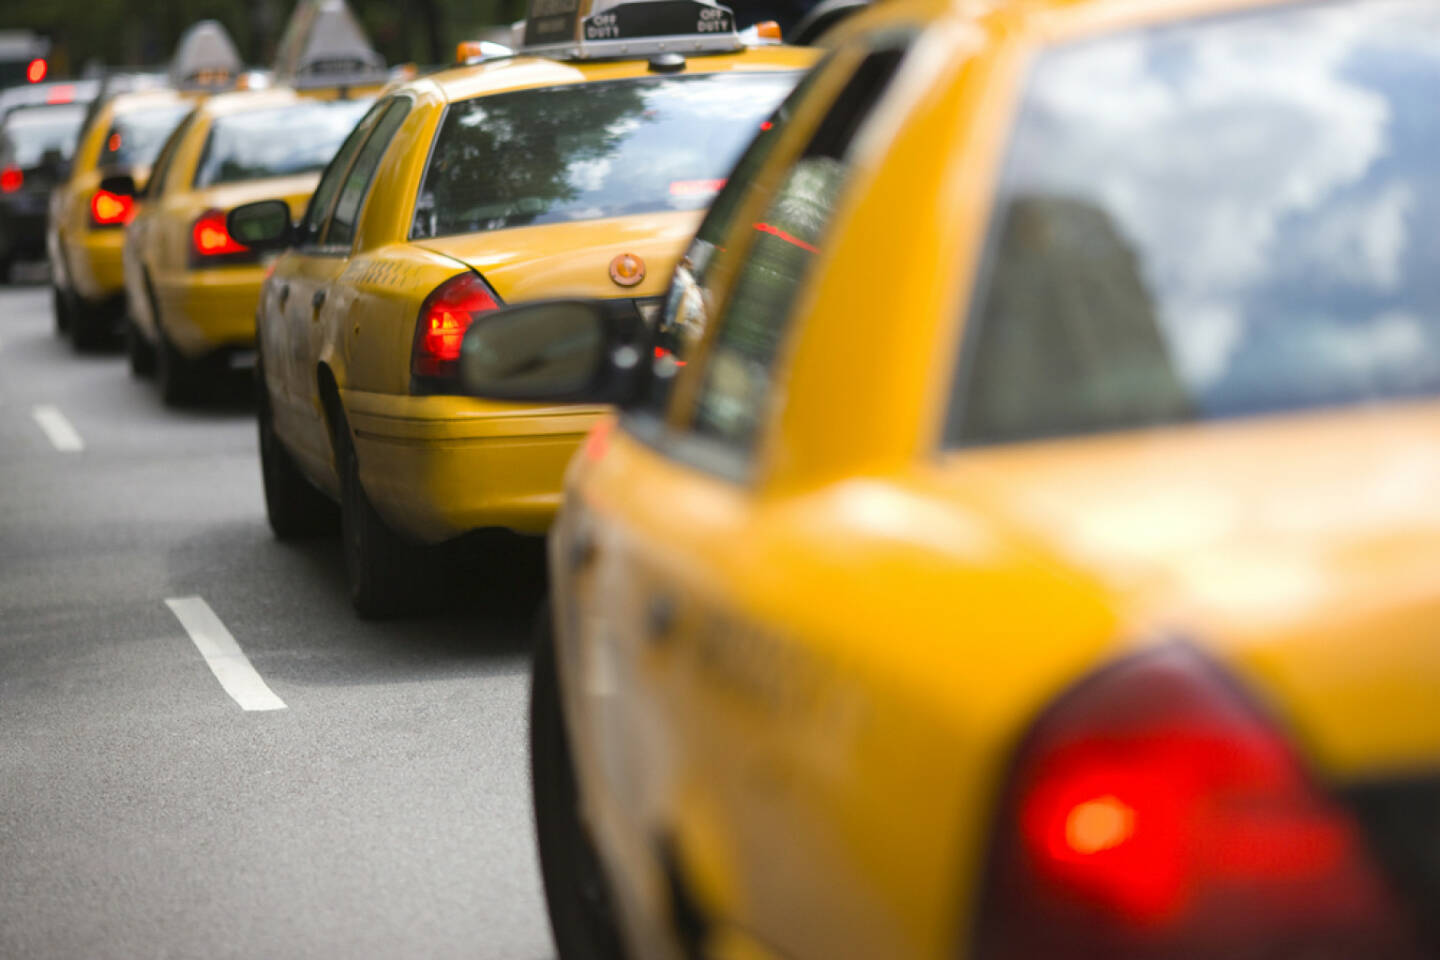 Taxi, New York, http://www.shutterstock.com/de/pic-145361332/stock-photo-new-york-city-cabs.html 